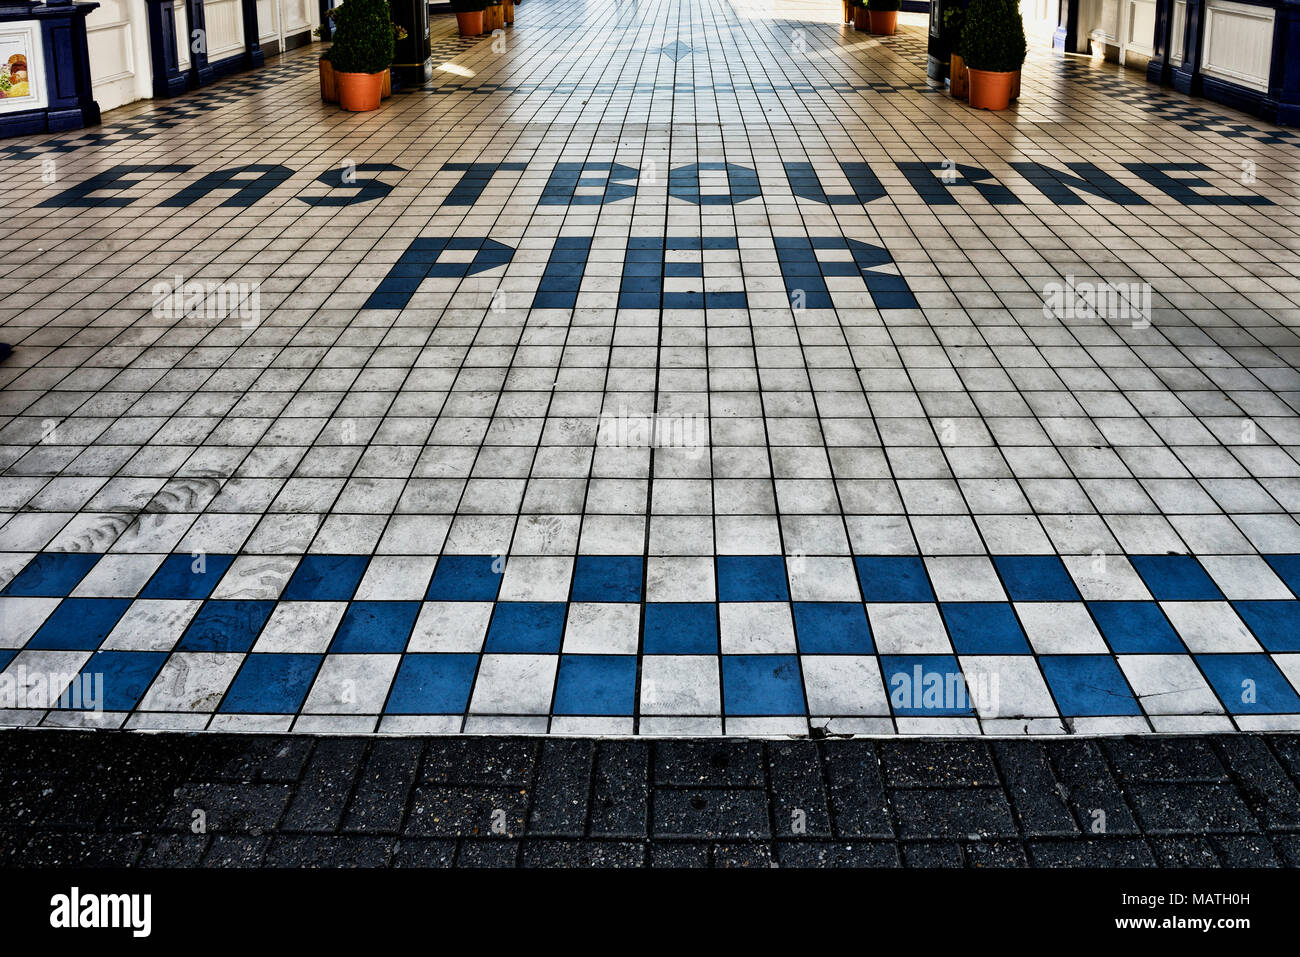 Tiled flooring at the entrance to Eastbourne pier, East Sussex, England, UK Stock Photo